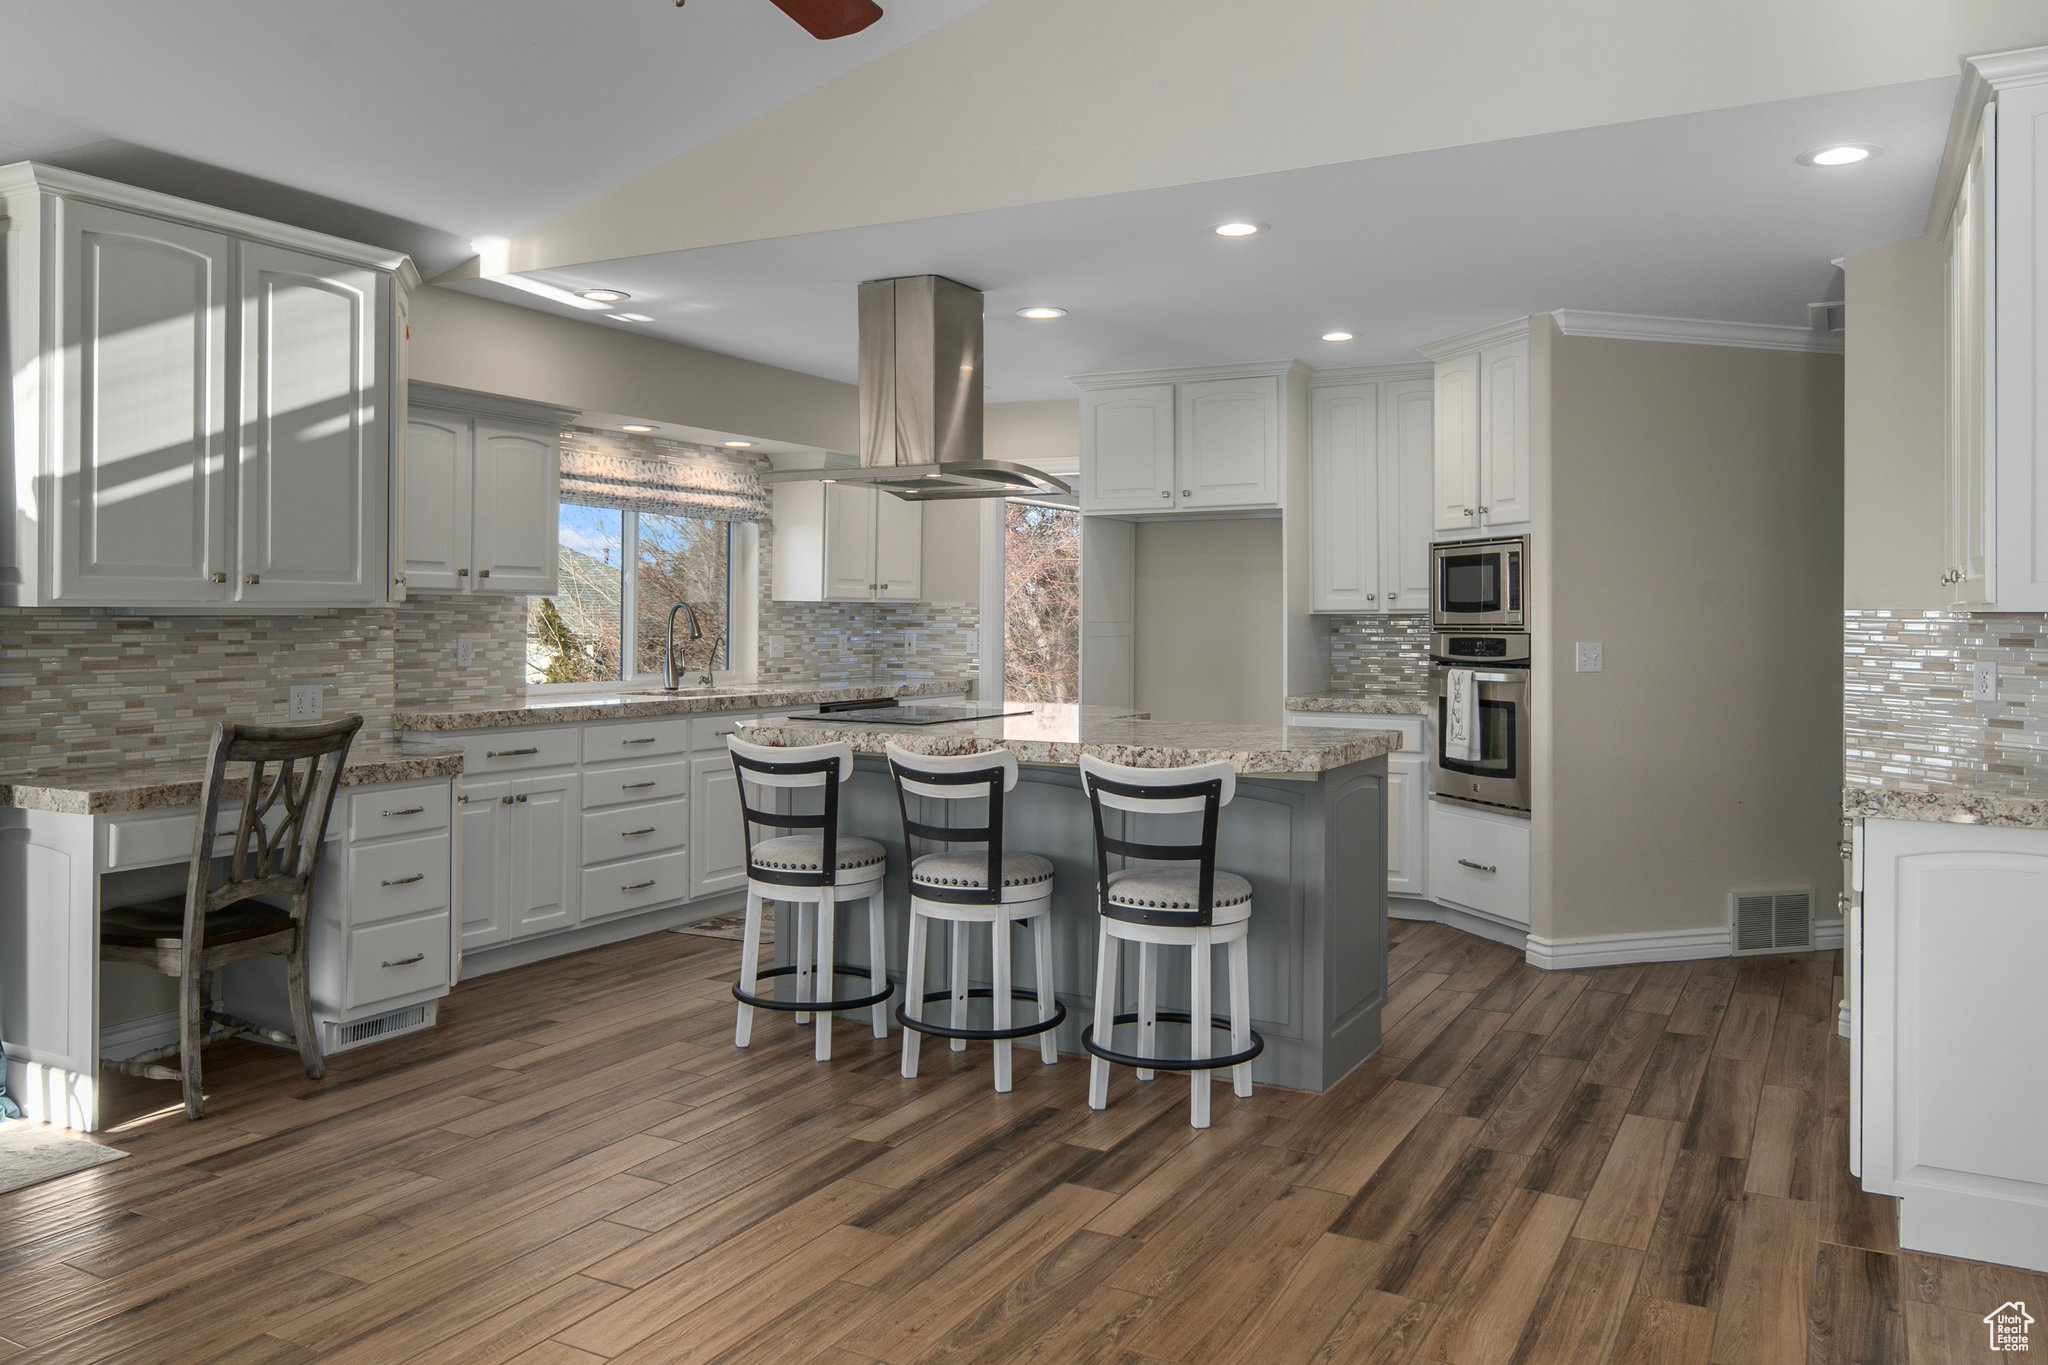 Kitchen featuring a kitchen breakfast bar, ceiling fan, appliances with stainless steel finishes, white cabinets, and island range hood